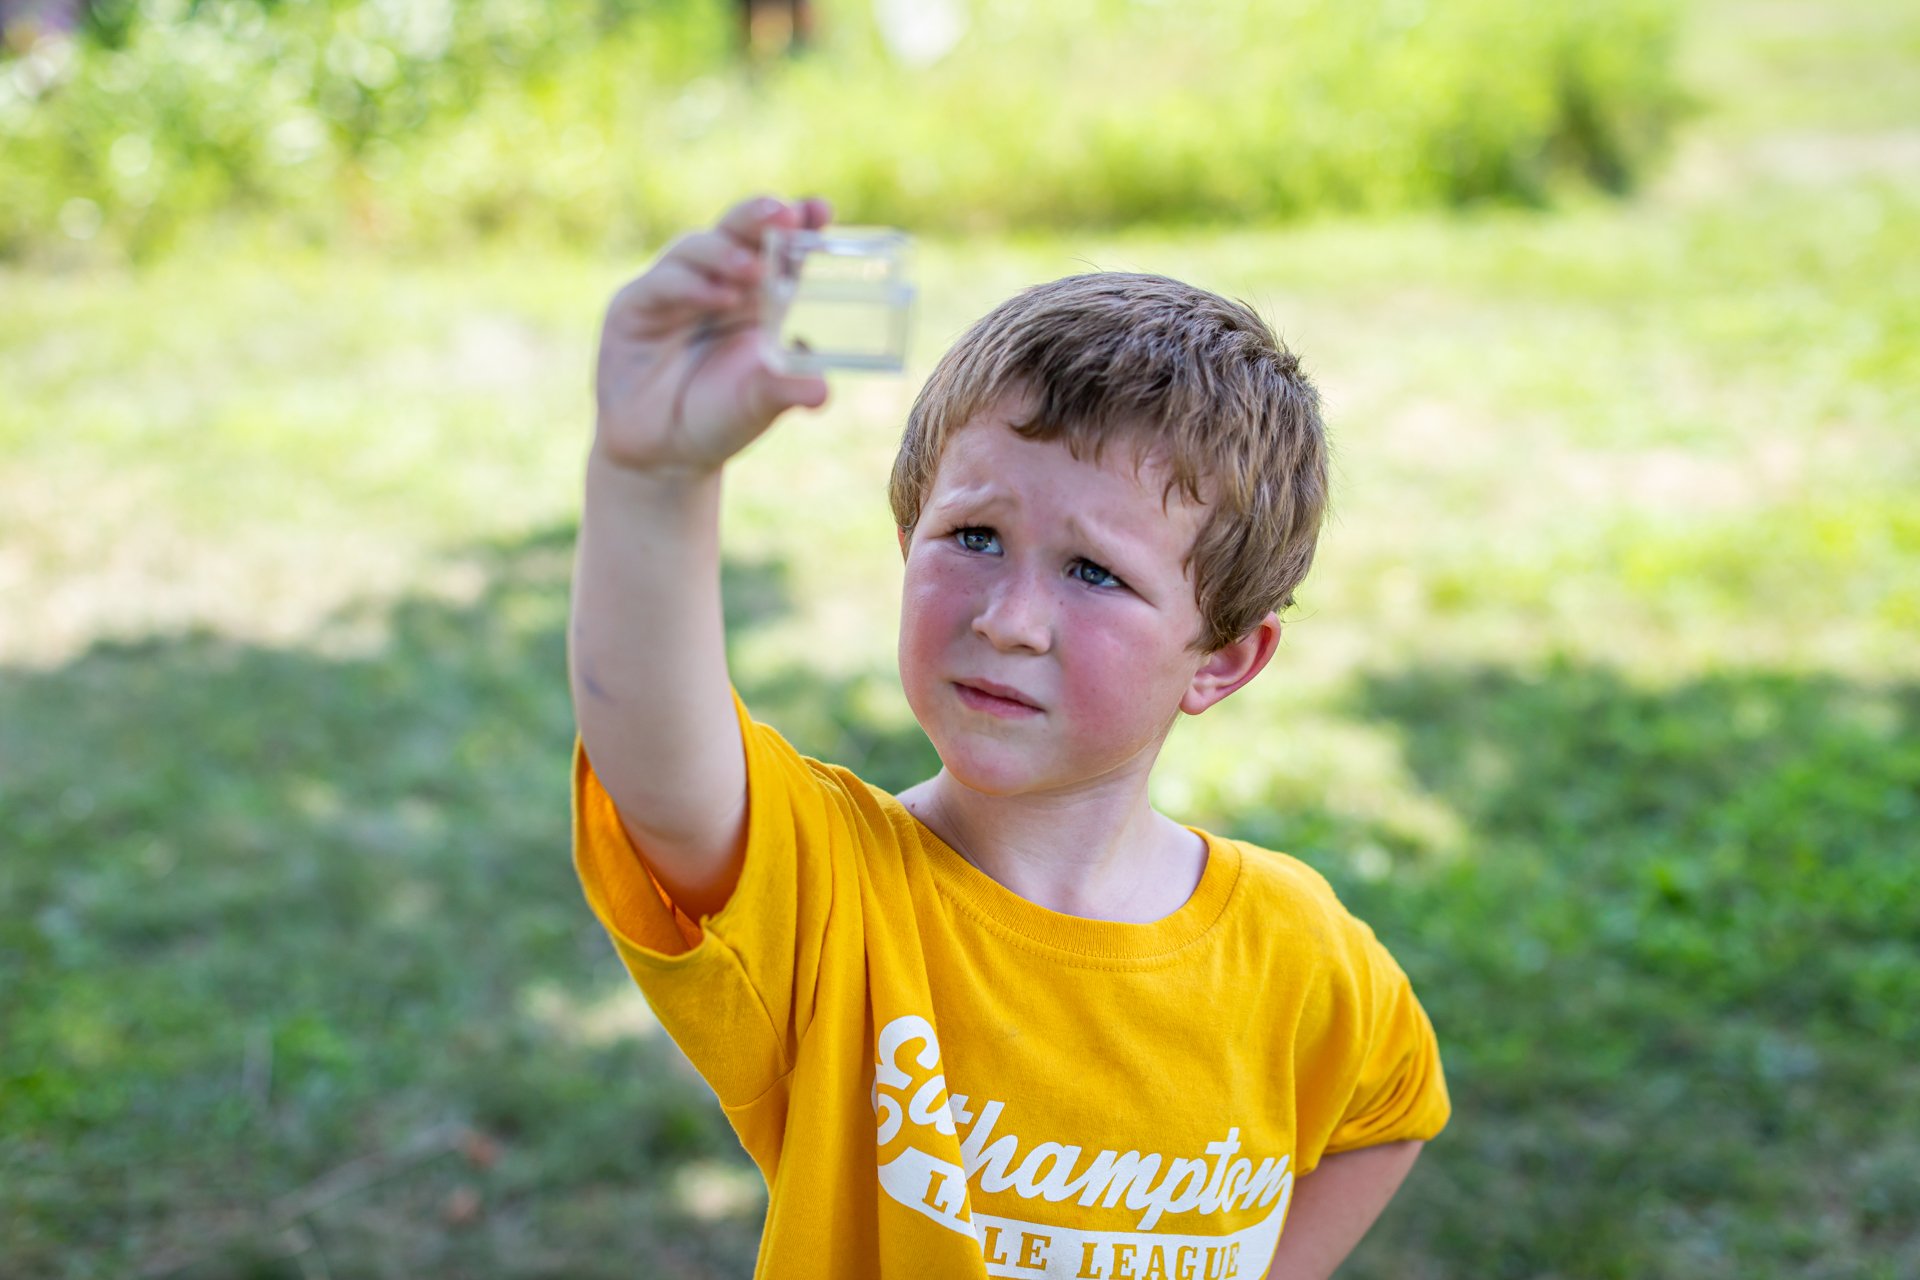 A camper wearing an Easthampton Little League shirt holds up a clear plastic specimen jar and peers at the insect inside